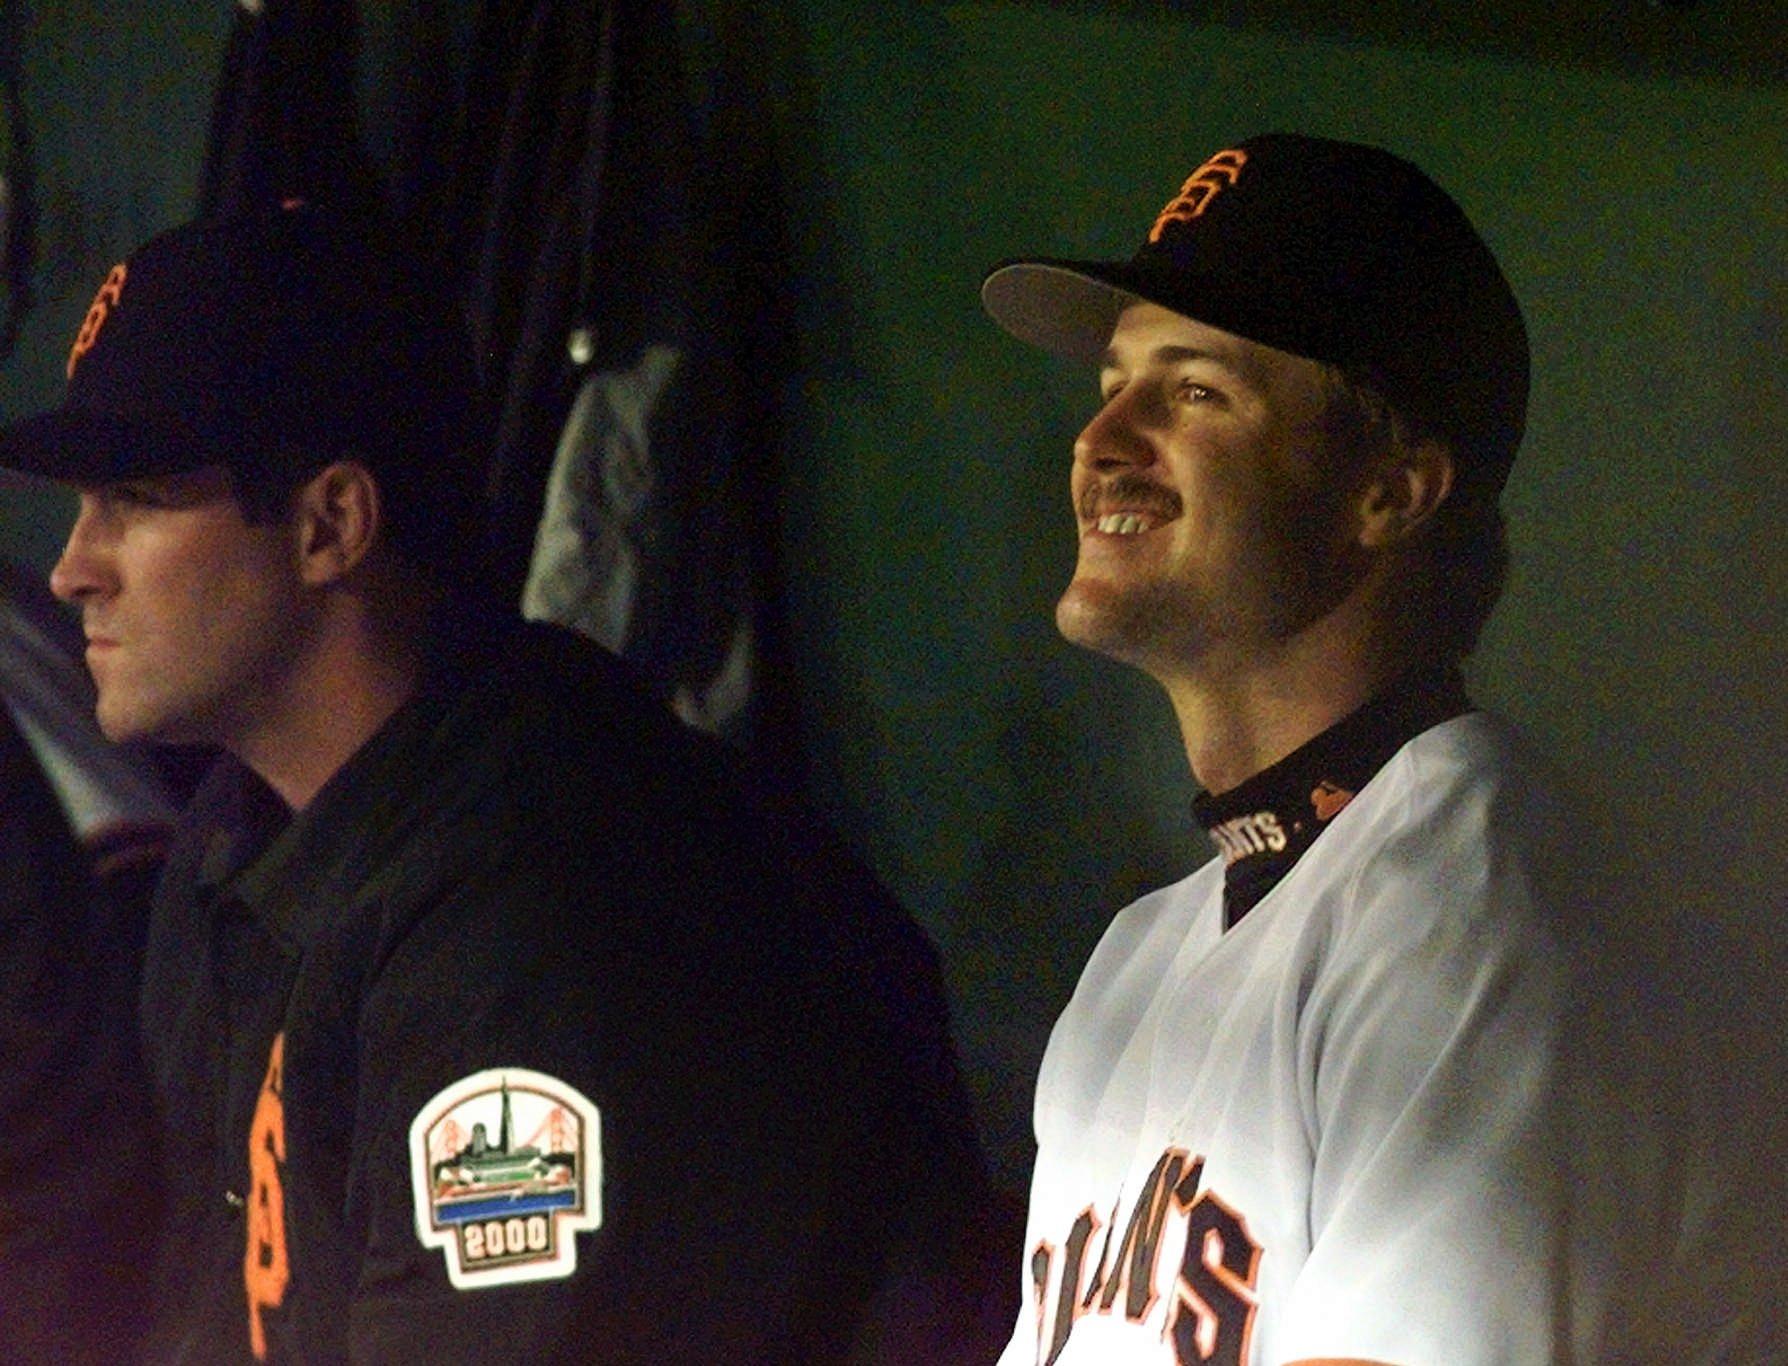 Former Giant Jeff Kent a forgotten man in Hall of Fame voting